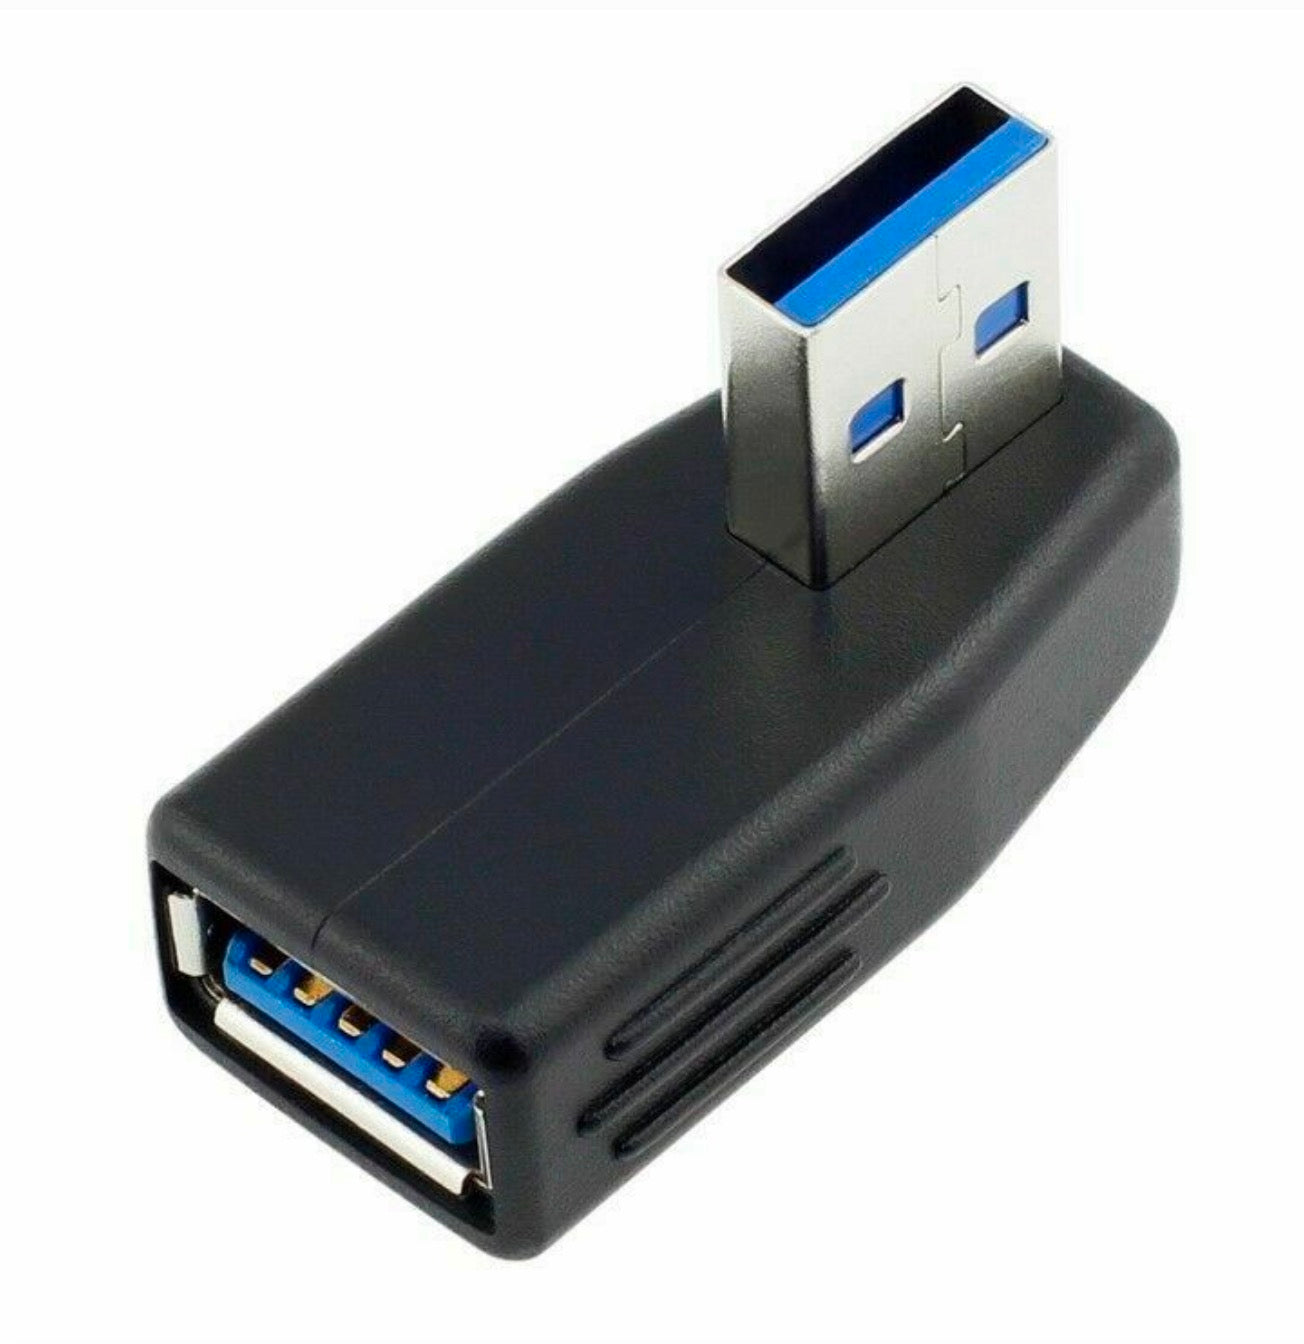 USB 3.0 Type A Angled Male to Female Data Adapter